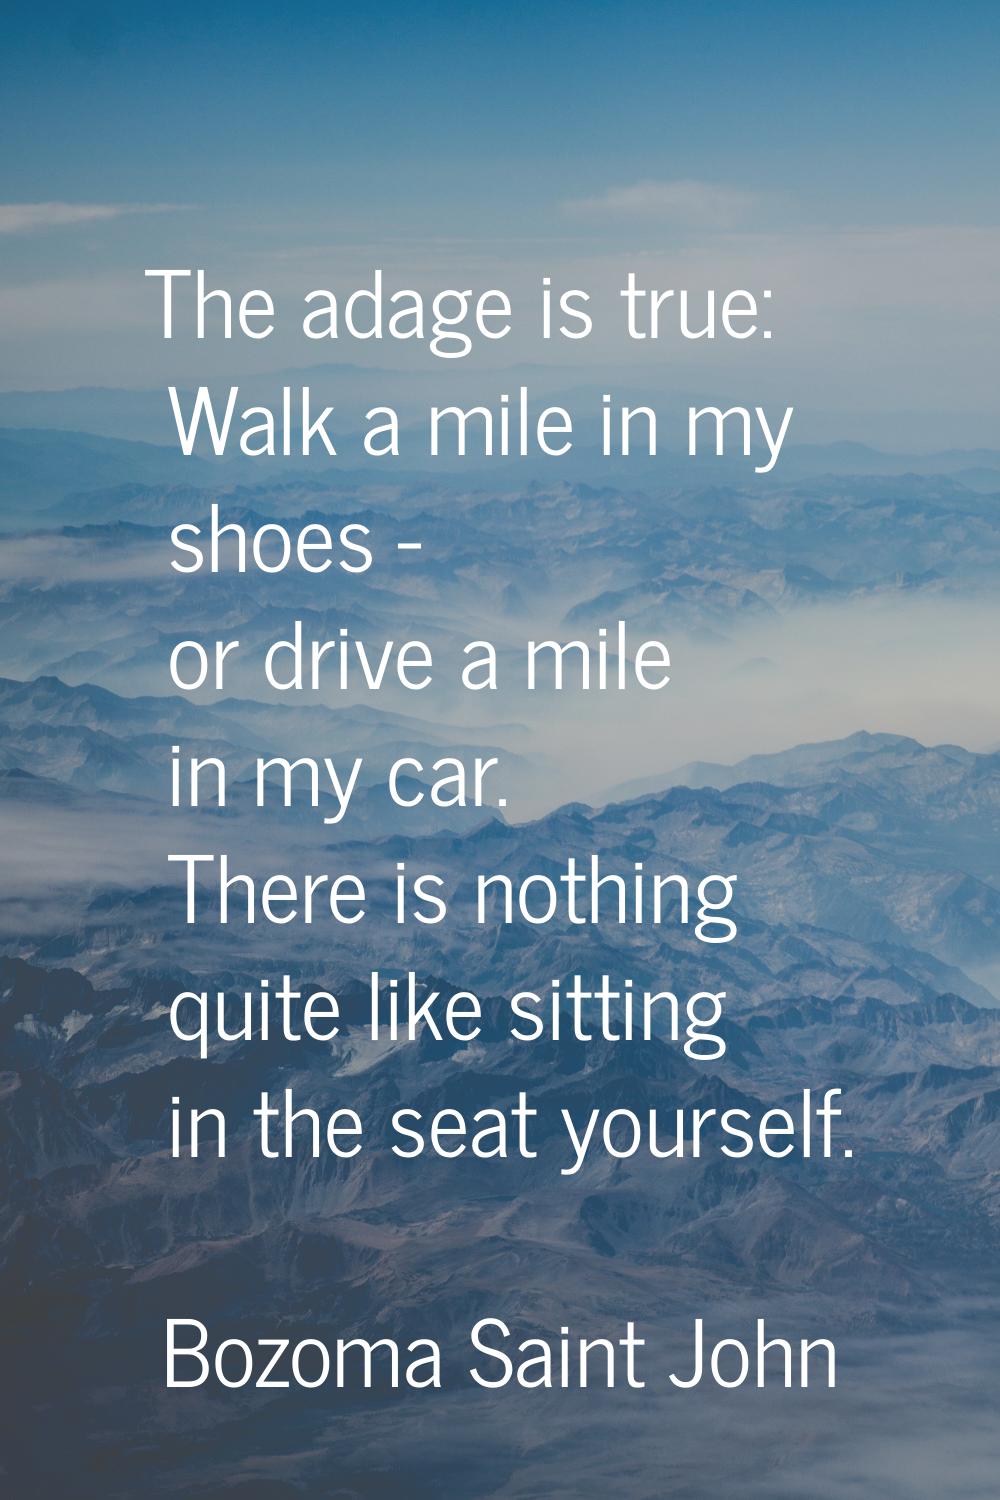 The adage is true: Walk a mile in my shoes - or drive a mile in my car. There is nothing quite like